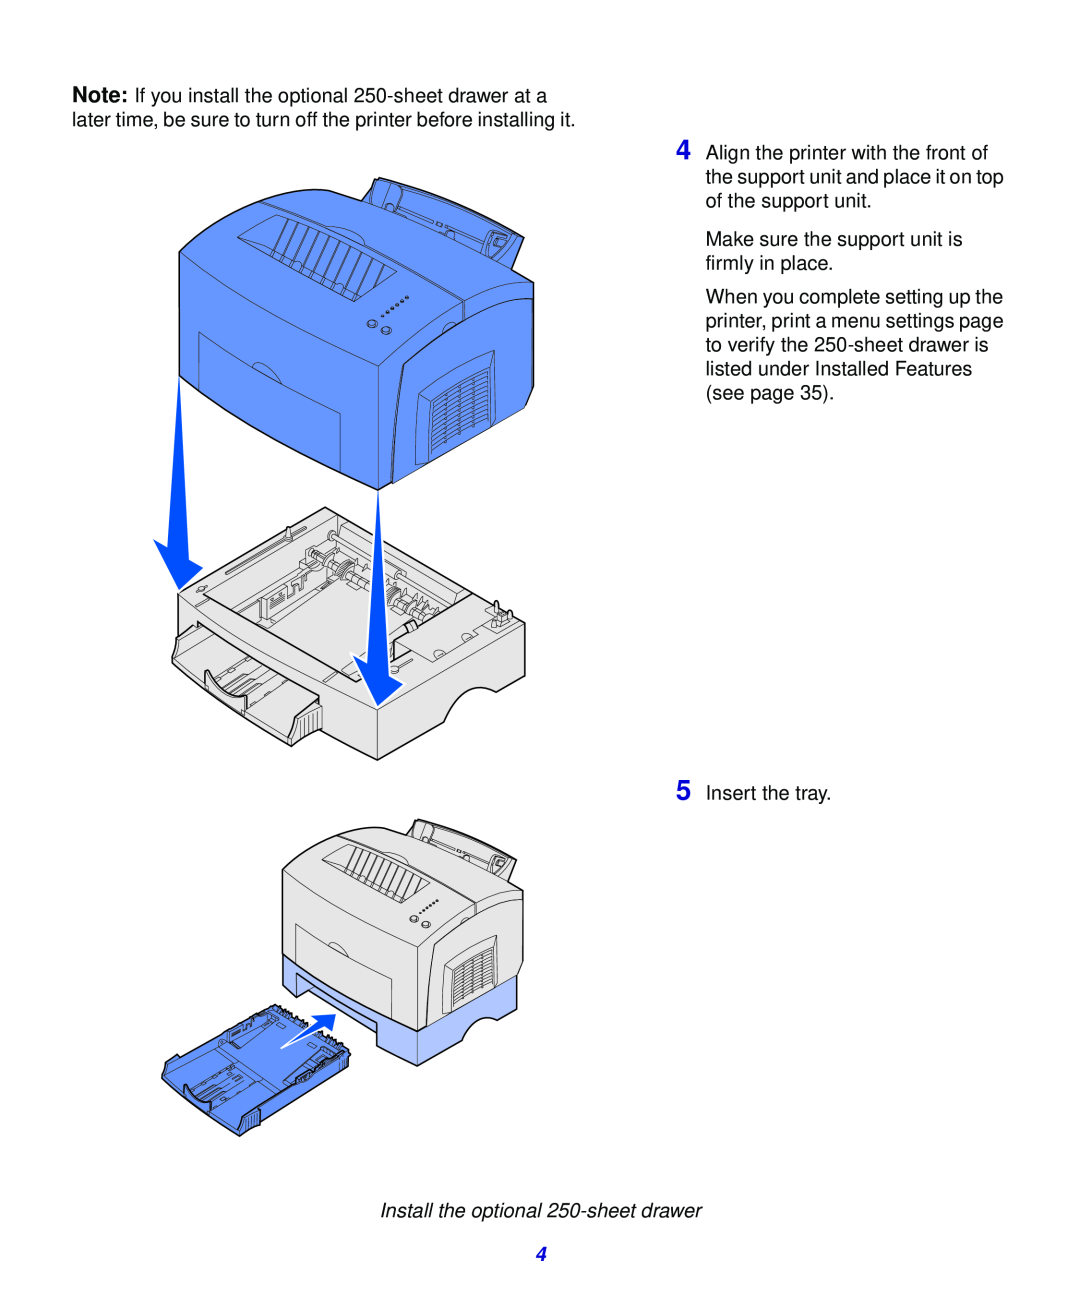 Lexmark 321, 323 setup guide Make sure the support unit is firmly in place 